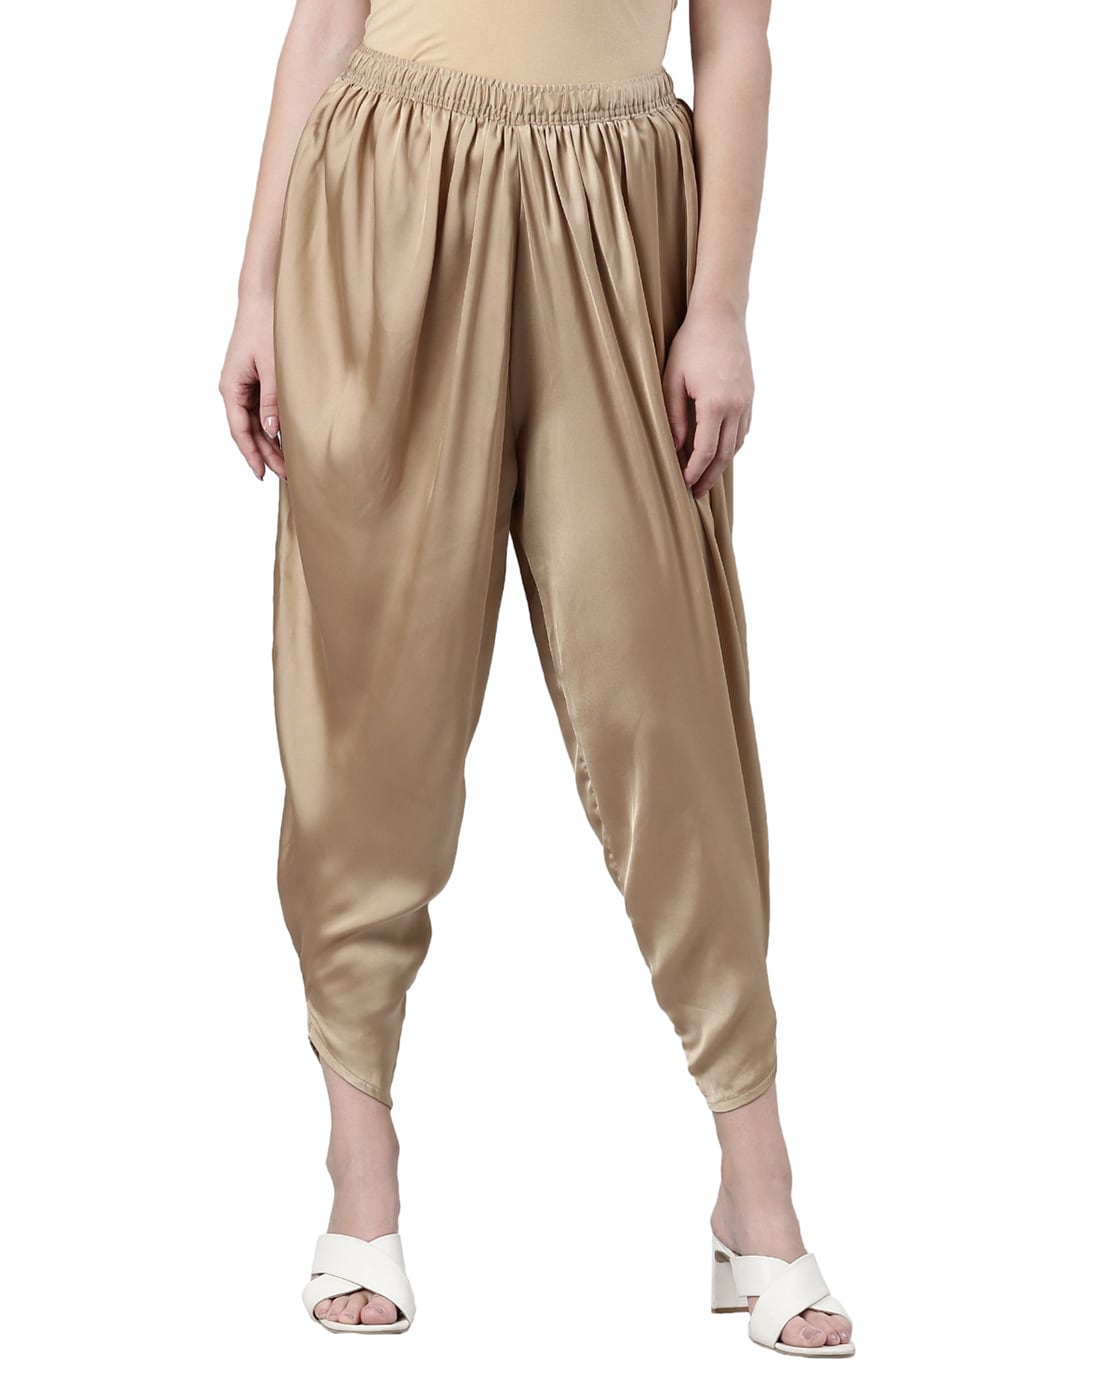 Baggy Harem Pants This Years Unisex Casual Wear 7 colors